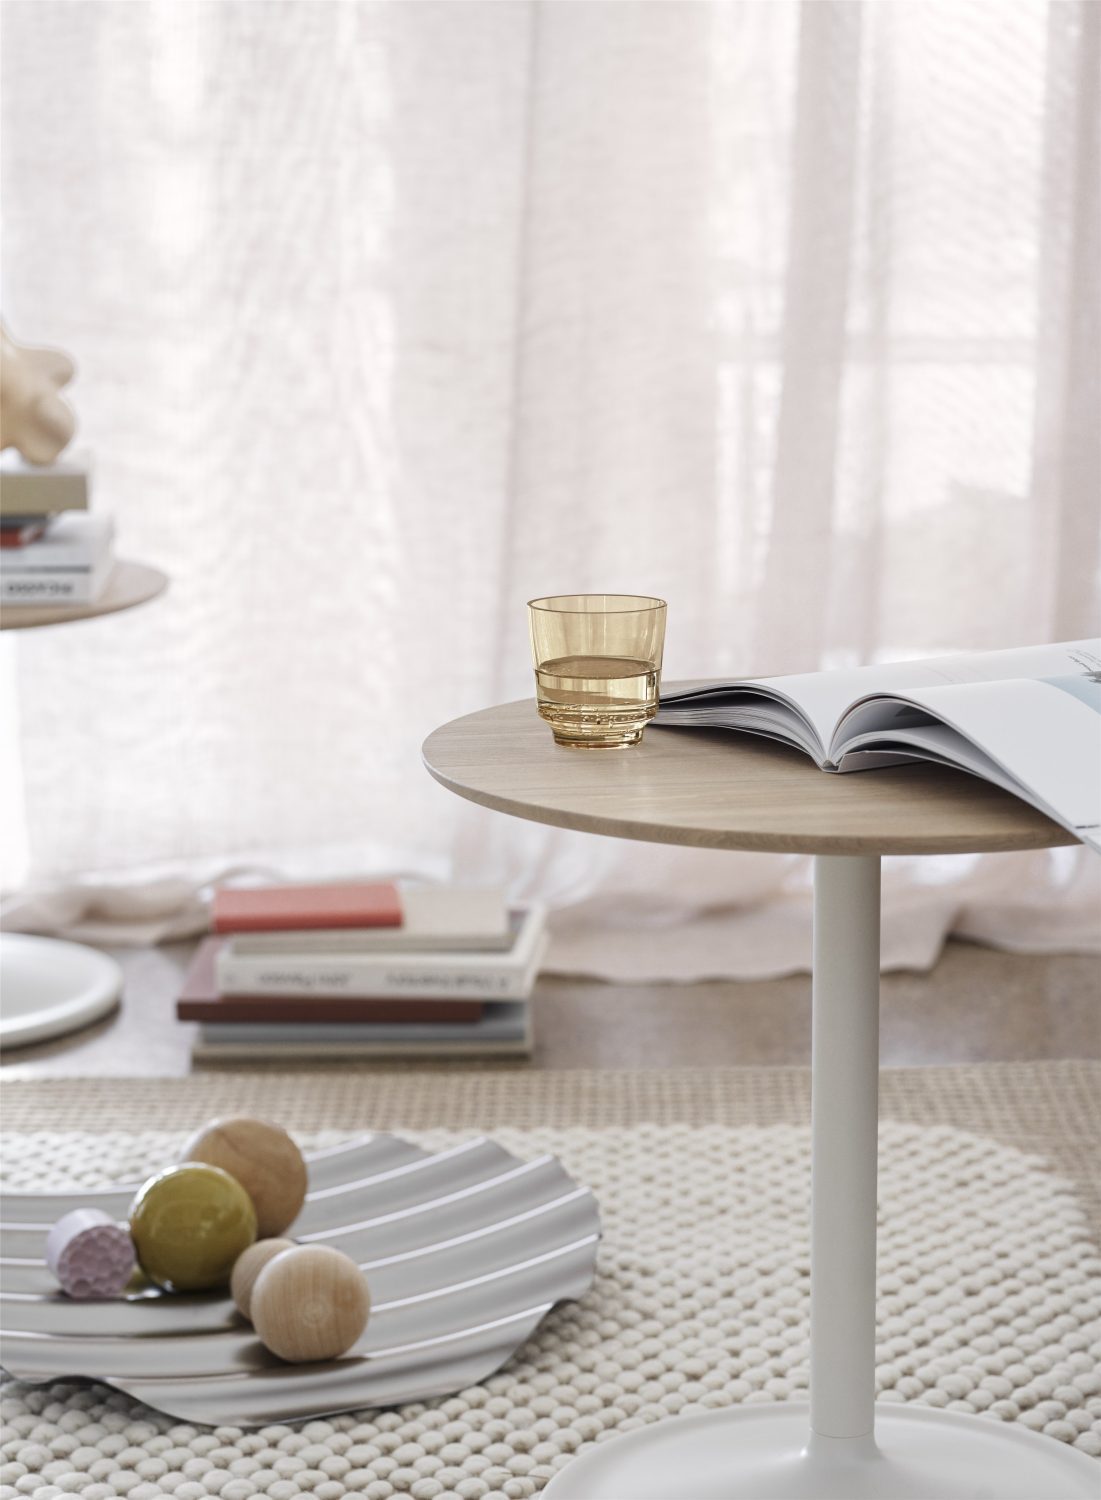 soft-side-O41-H48-solid-oak-off-white-wave-tray-raise-glass-ochre-pebble-pale-rose-muuto-org_(150)